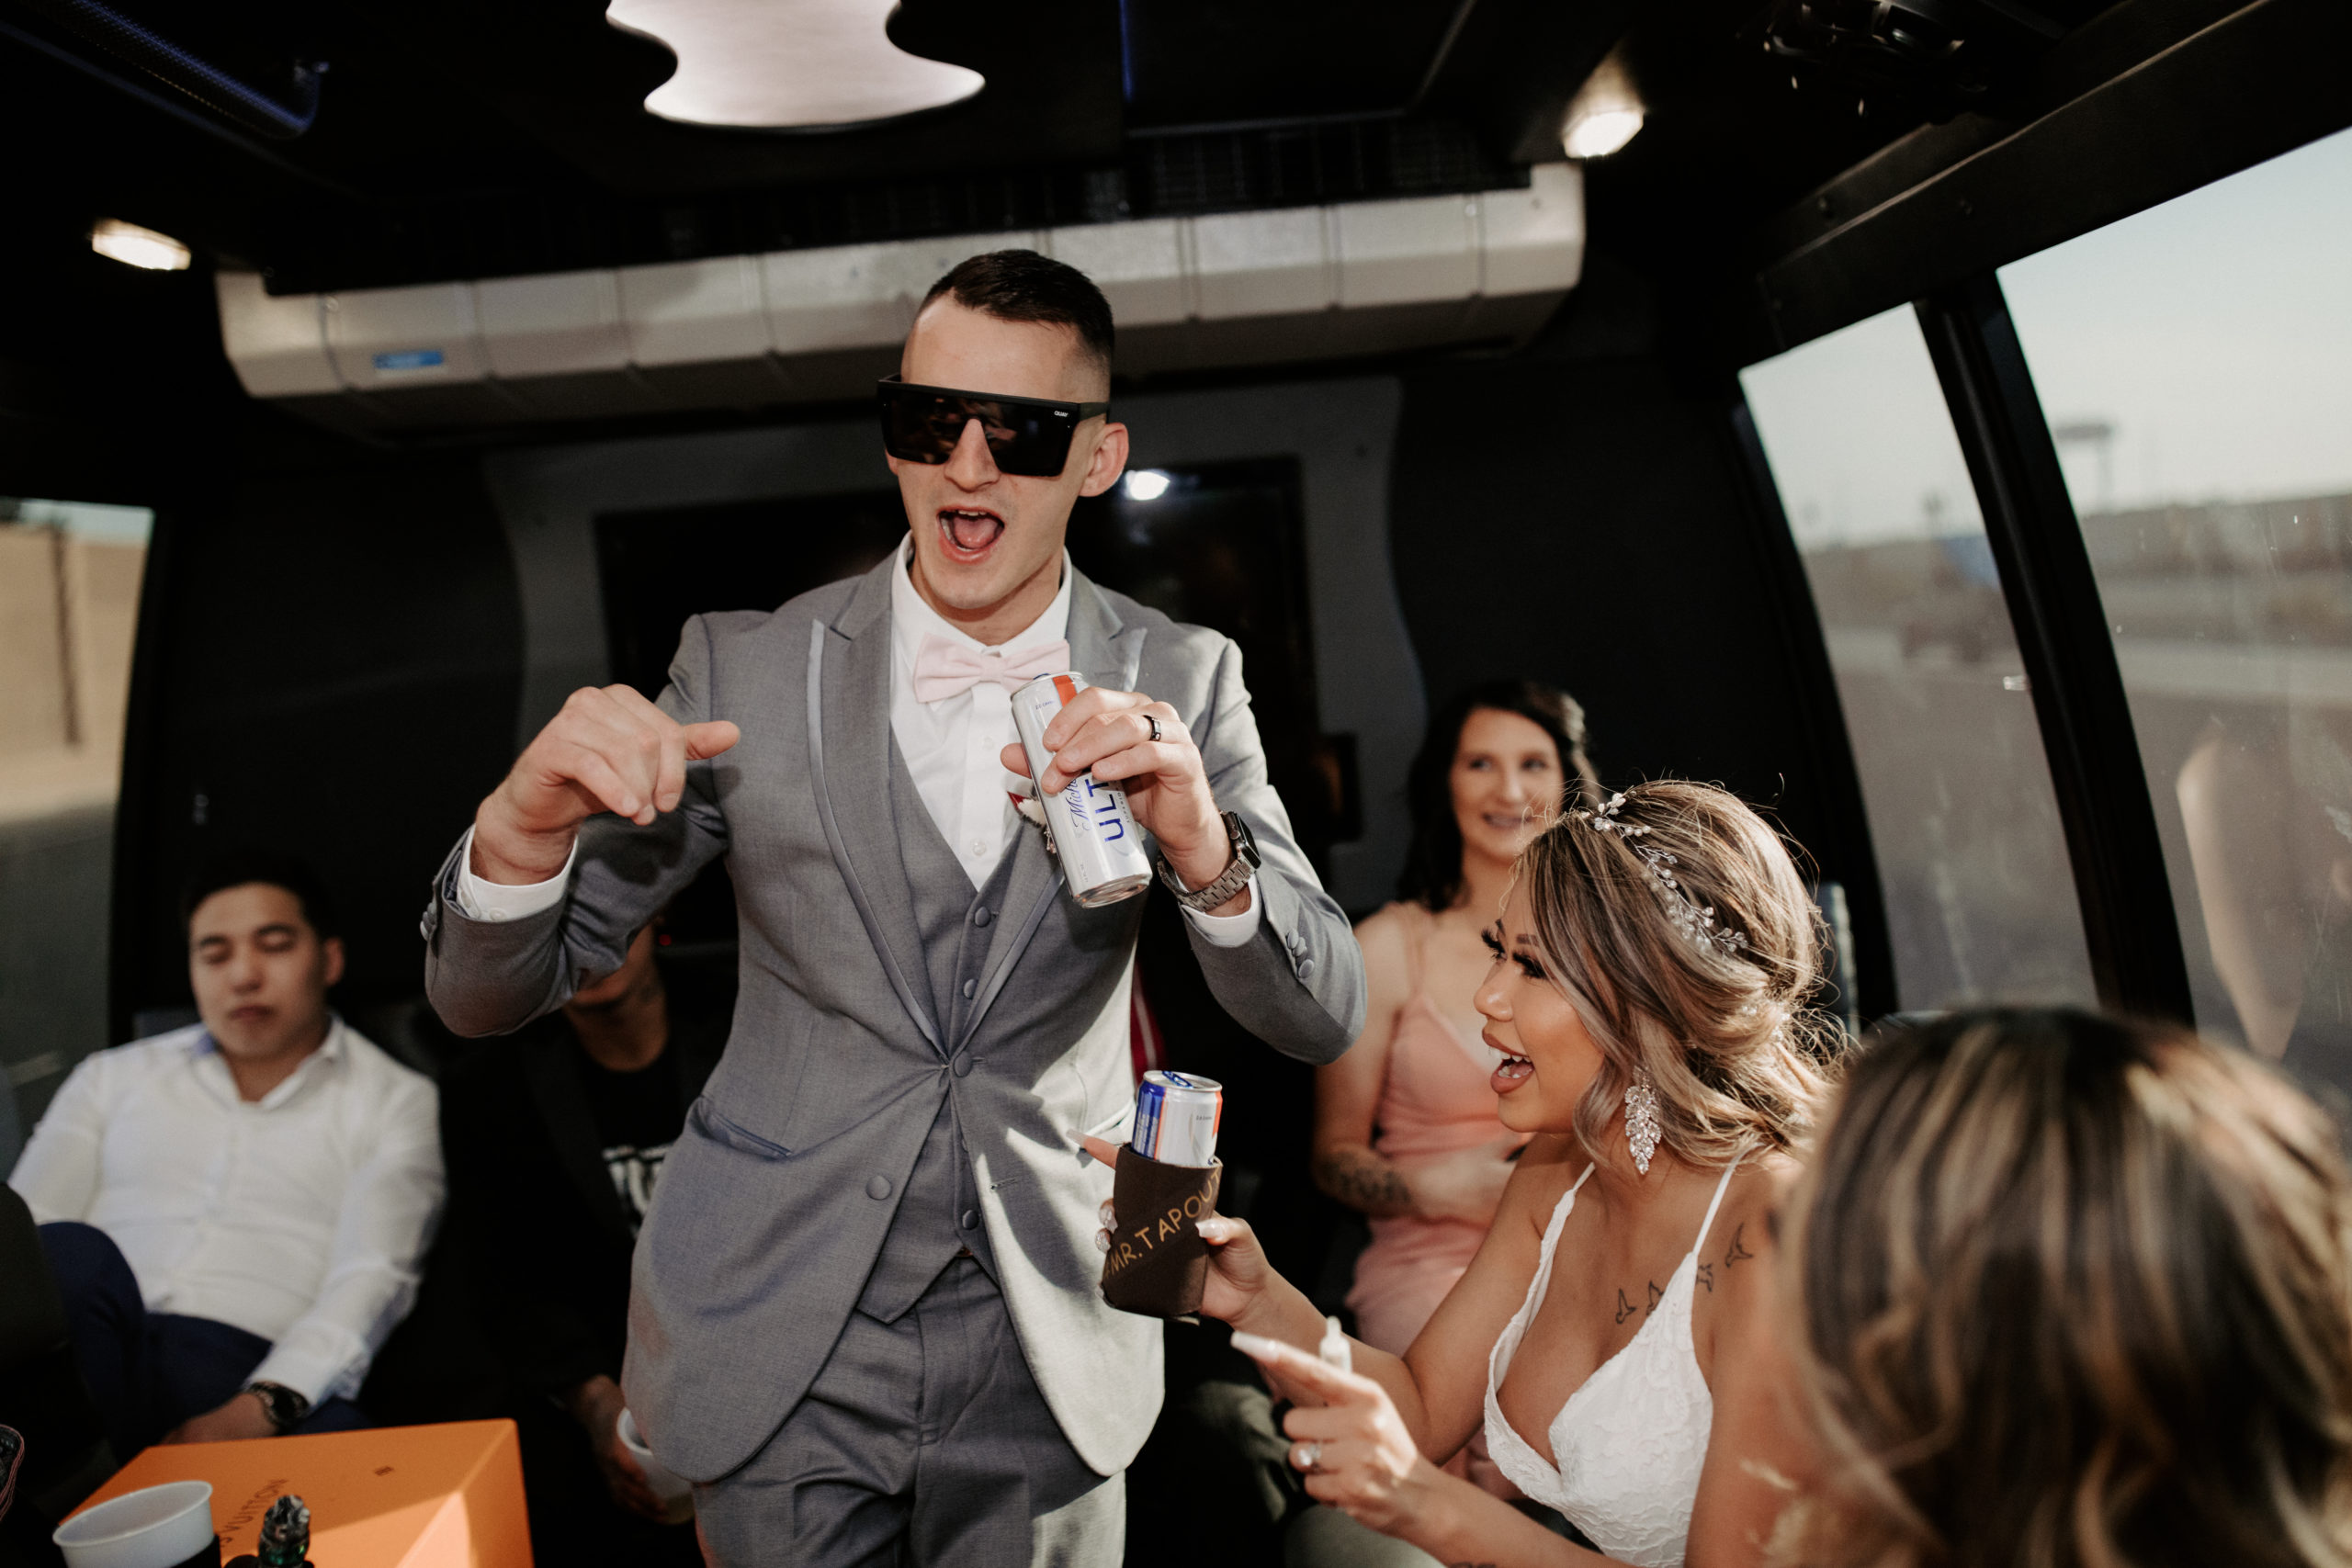 Couple & guests having a good time on party bus on their way to elopement location